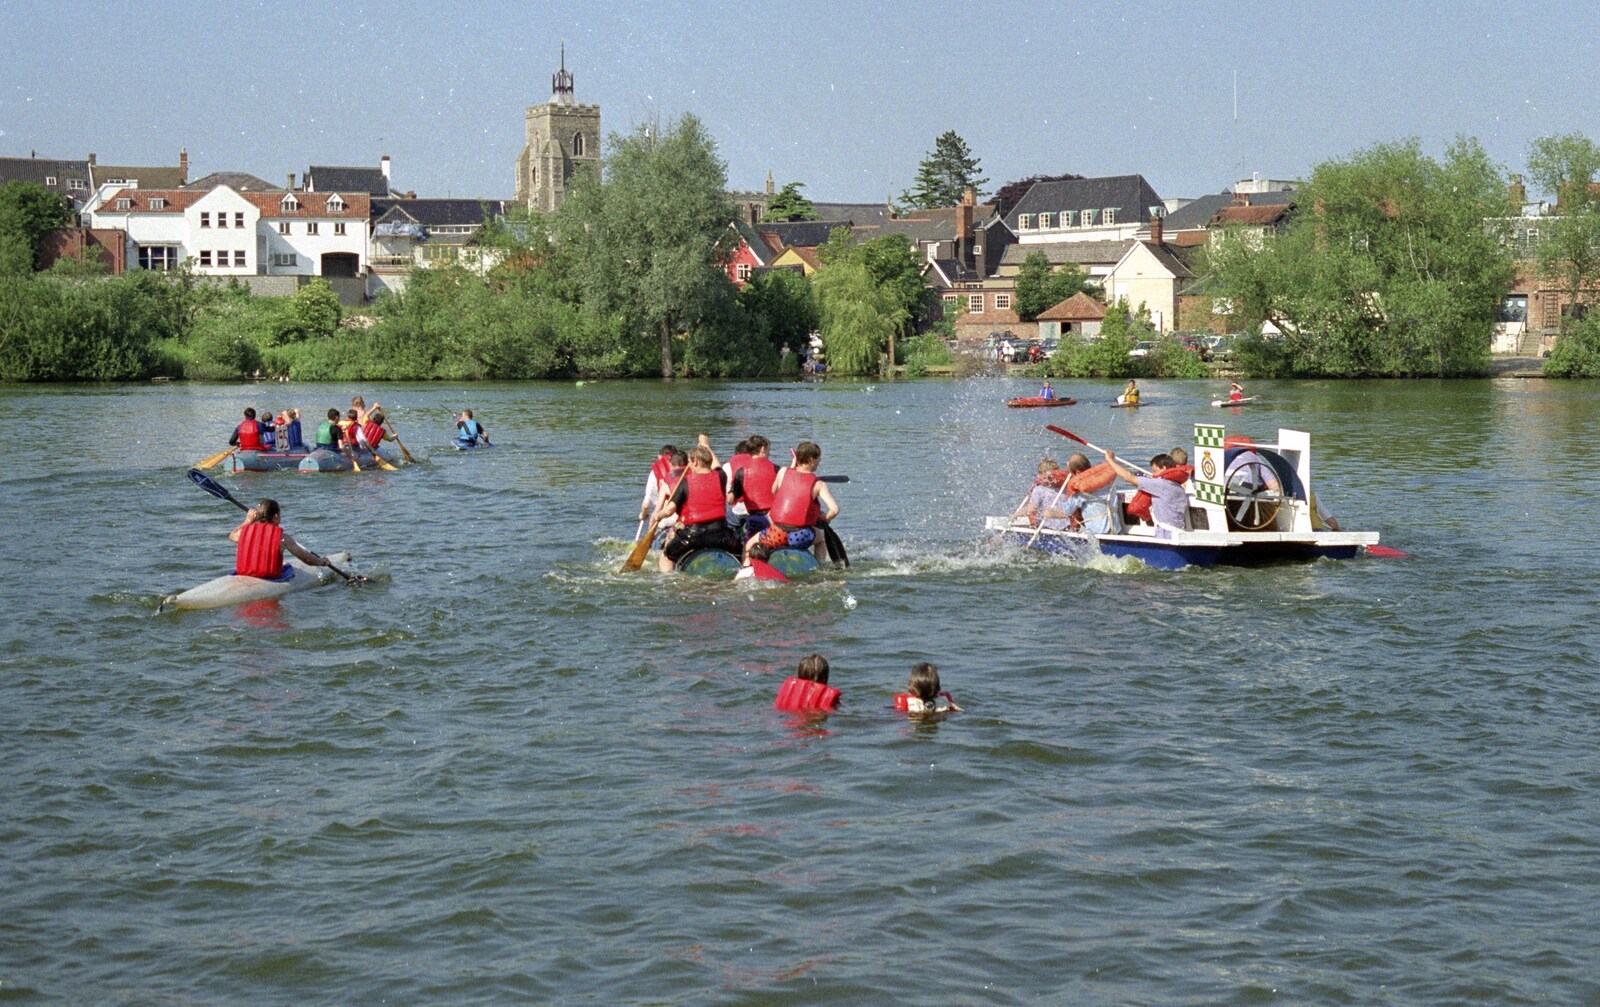 Frantic paddling, with a few overboard from The Diss Raft Race, Diss Mere, Norfolk - 6th July 1991